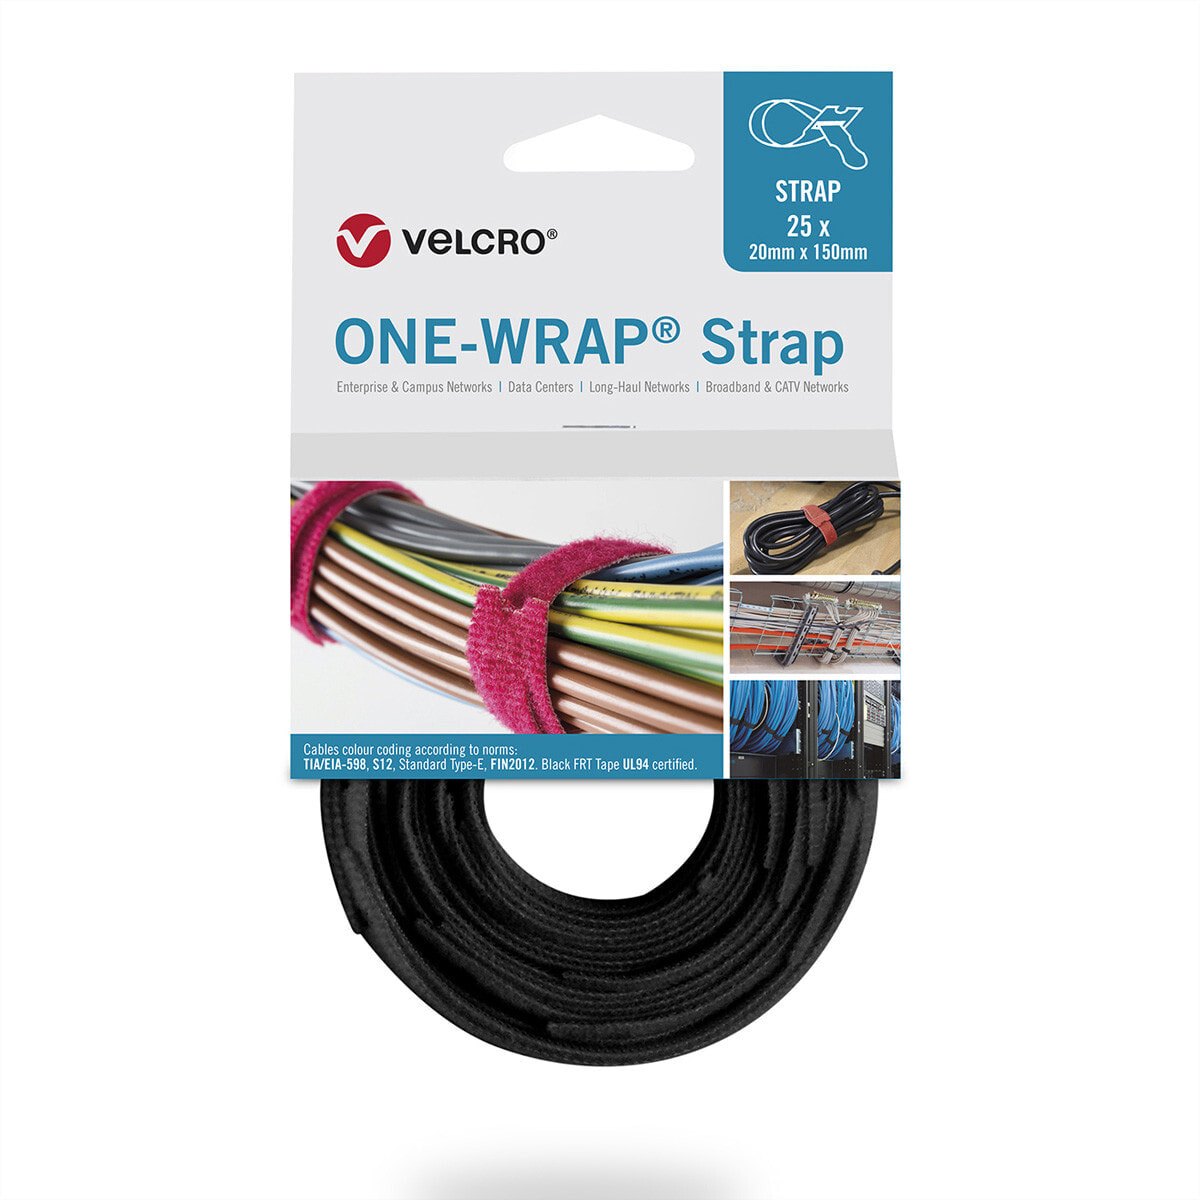 VELCRO ONE-WRAP - Releasable cable tie - Polypropylene (PP) - Velcro - Black - 200 mm - 13 mm - 25 pc(s)